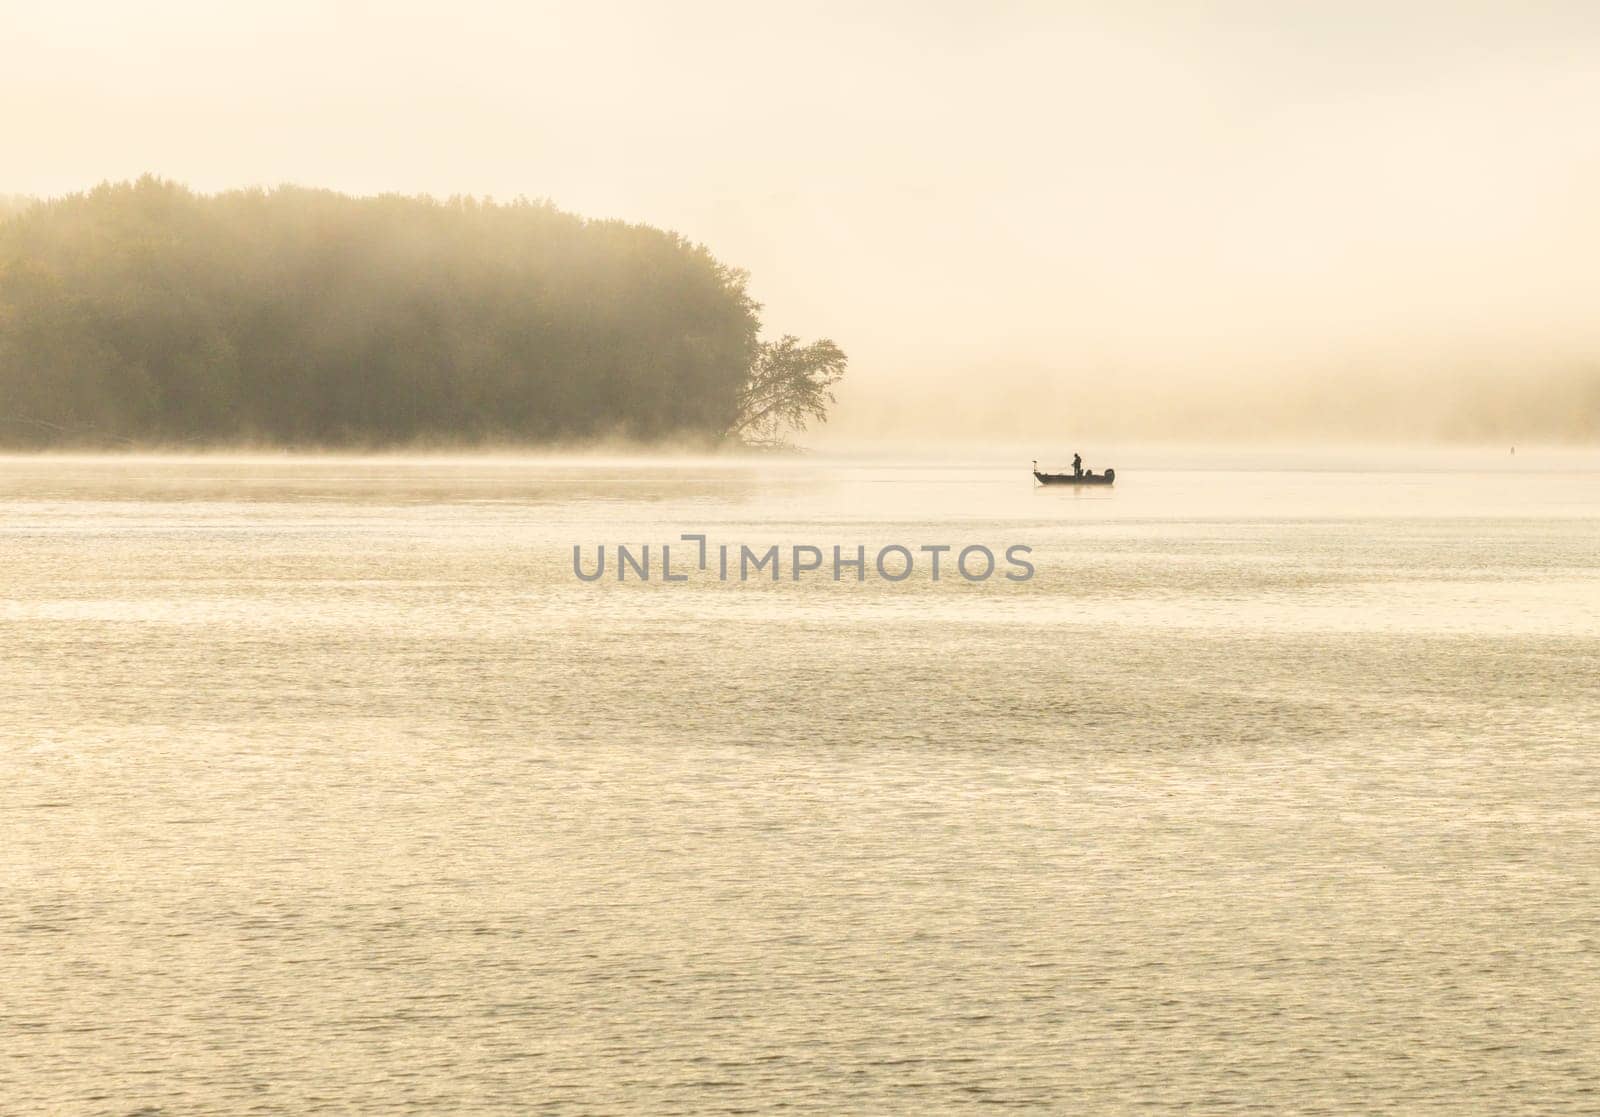 Fisherman fishing in Mississippi river on misty autumn morning by steheap